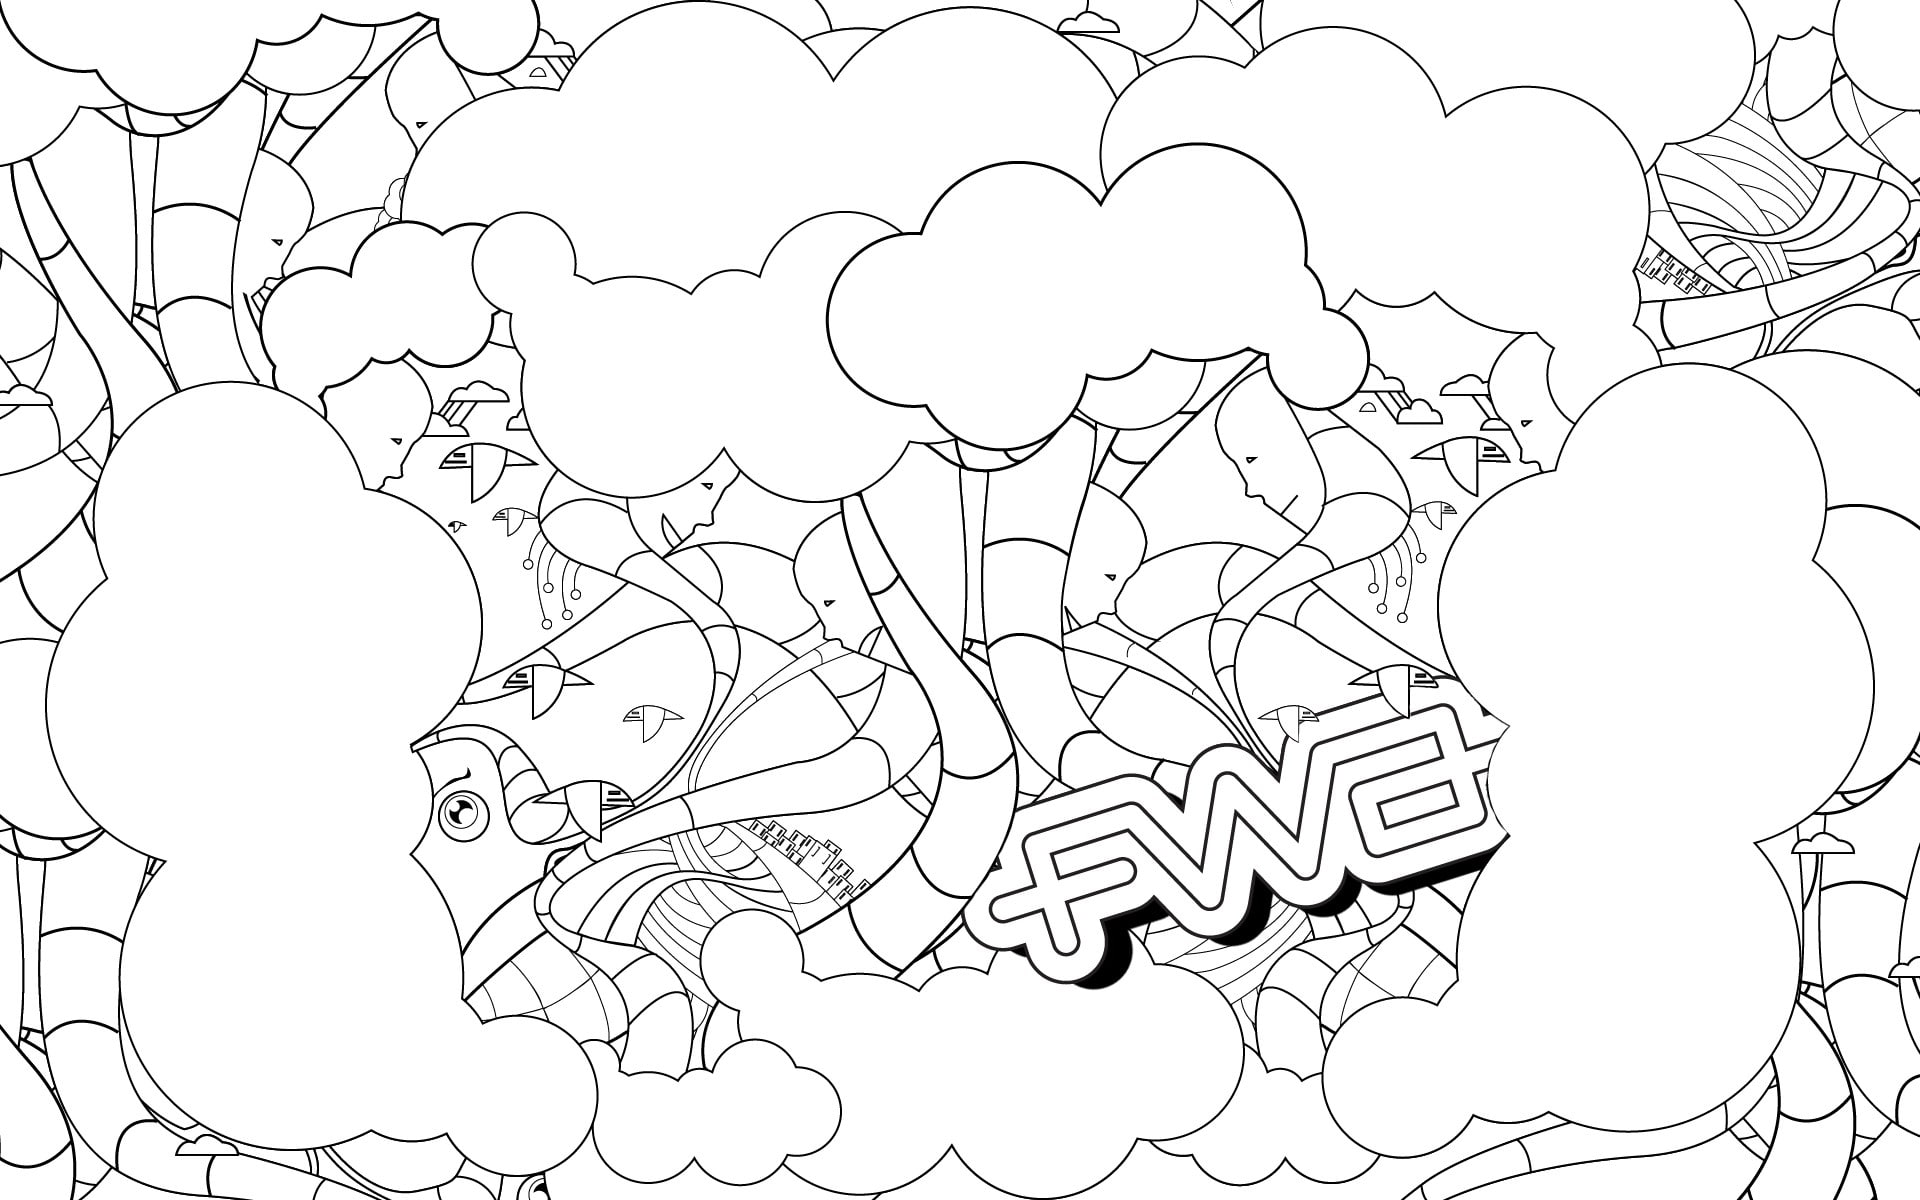 Black, White, Drawing, Imagination, Power, Confusion, Fwa, cloud - sky